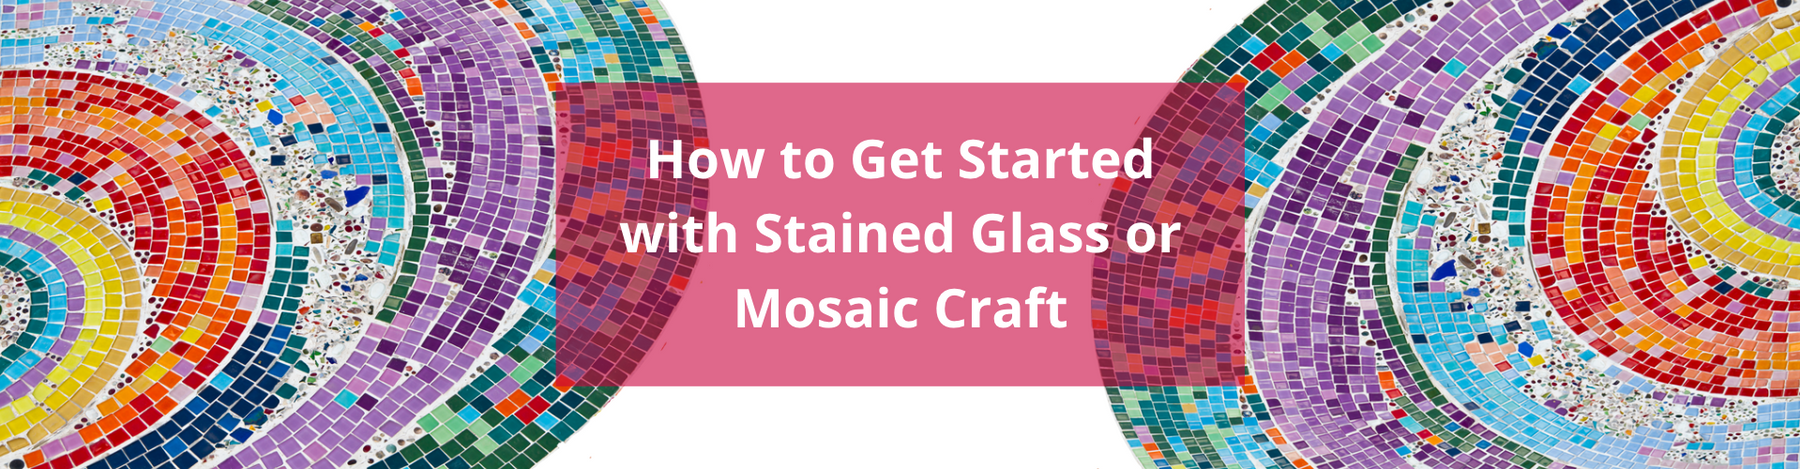 How to Get Started with Stained Glass or Mosaic Craft